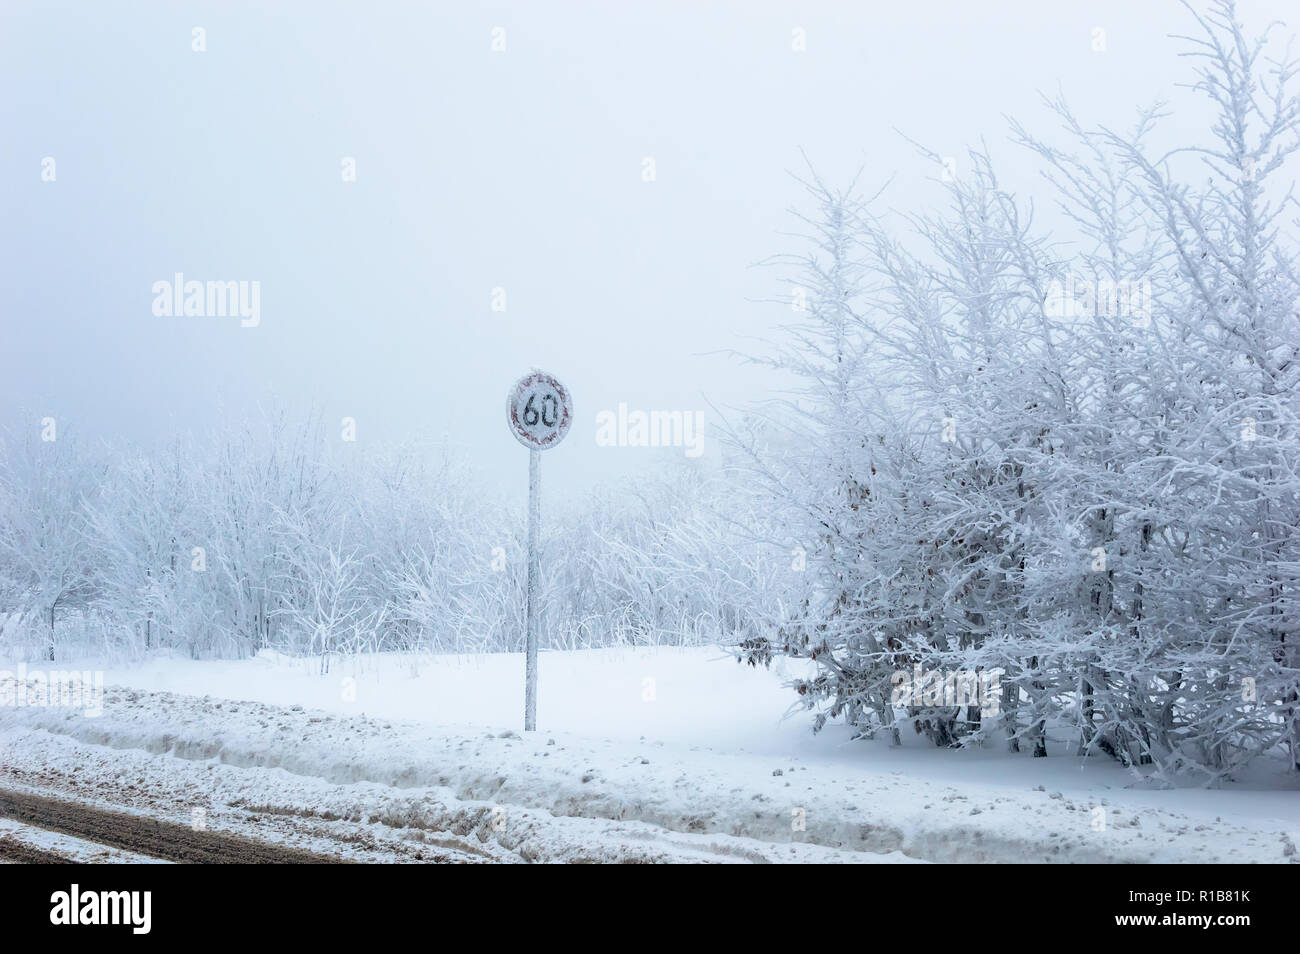 Speed limit traffic sign covered with ice and snow on snowy winter background Stock Photo